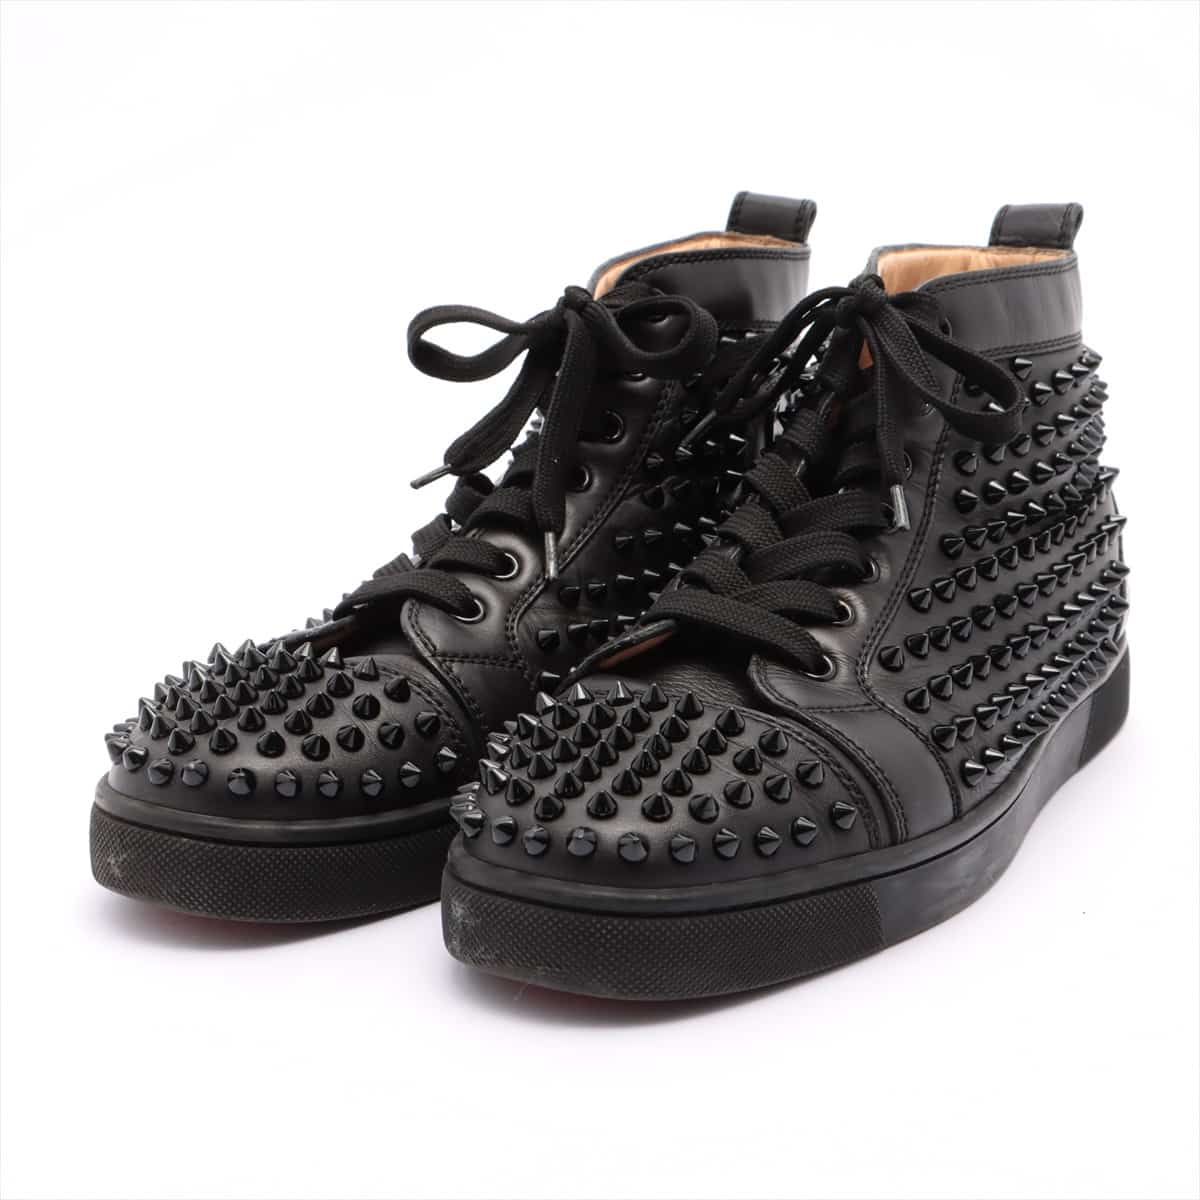 Christian Louboutin Lewis Spike Leather High-top Sneakers 41 Men's Black There are cigarette extinguishing marks